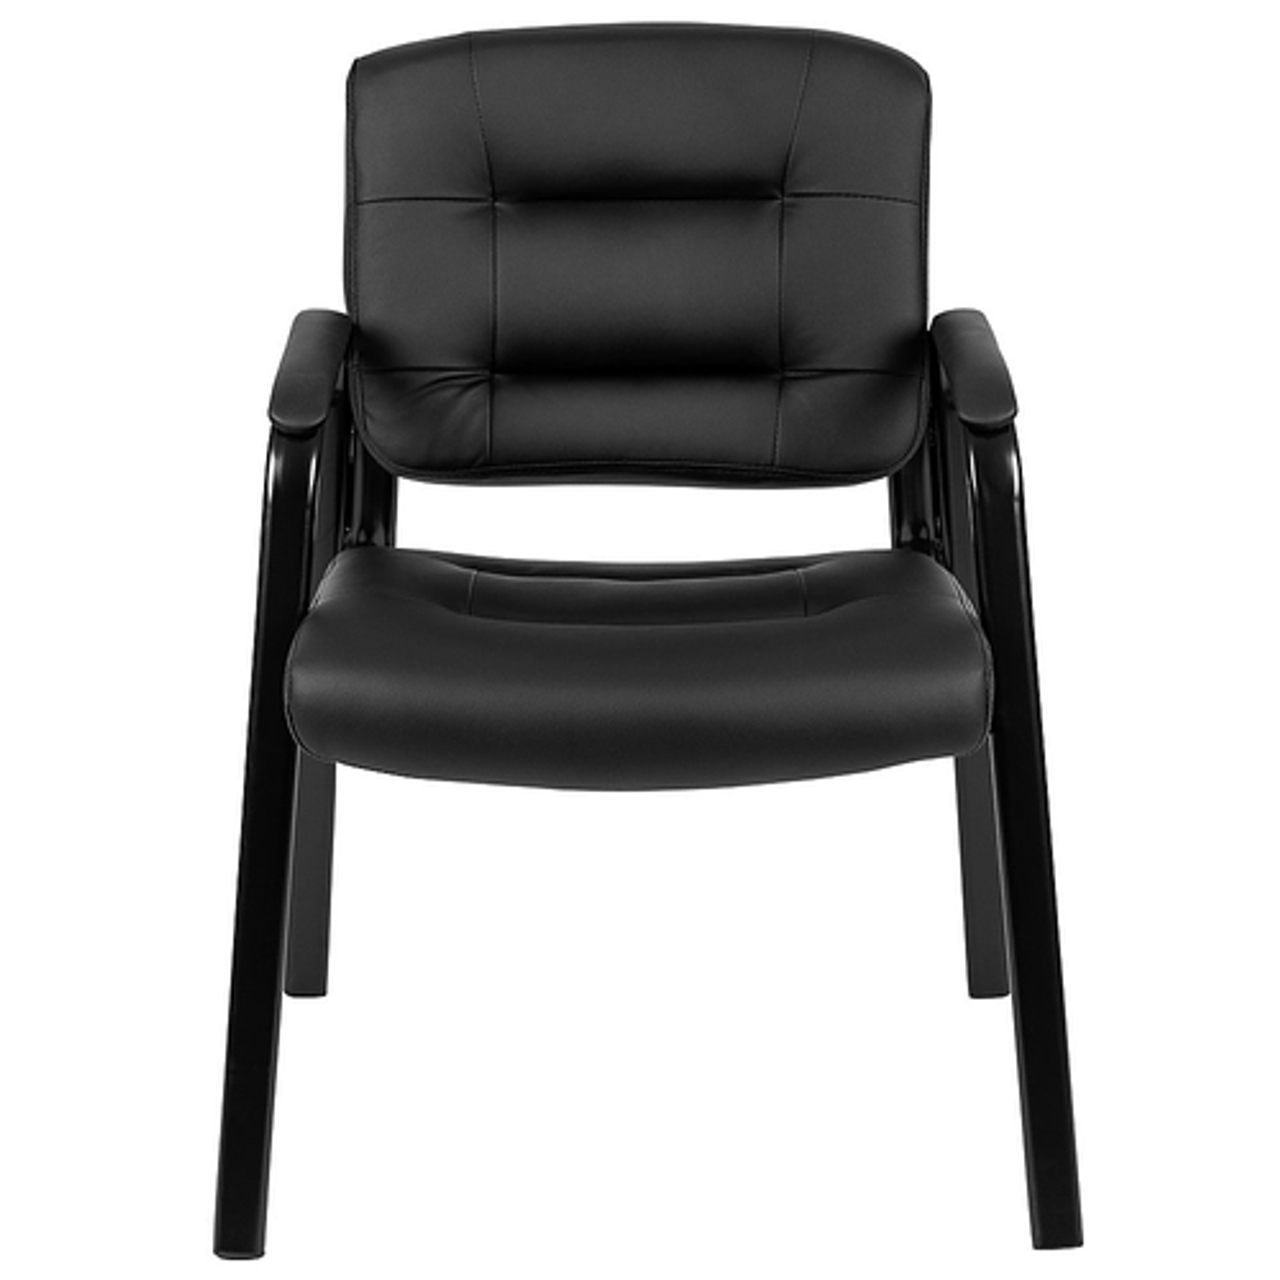 Flash Furniture - Flash Fundamentals LeatherSoft Executive Reception Chair with Black Metal Frame, BIFMA Certified - Black